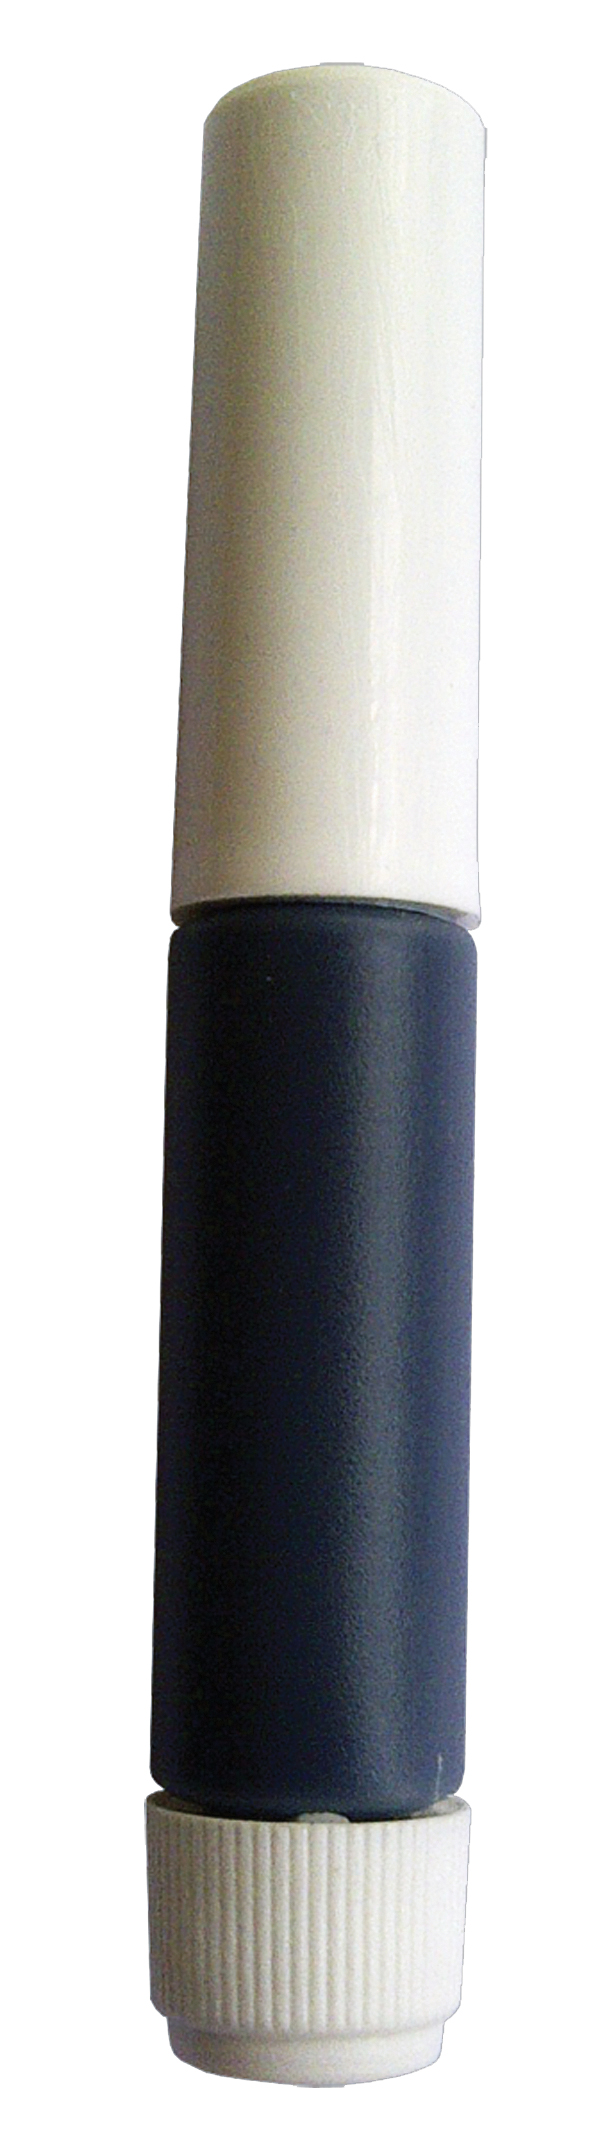 Black Re-fill Ink for Self Inking Stamp. 1.5ml